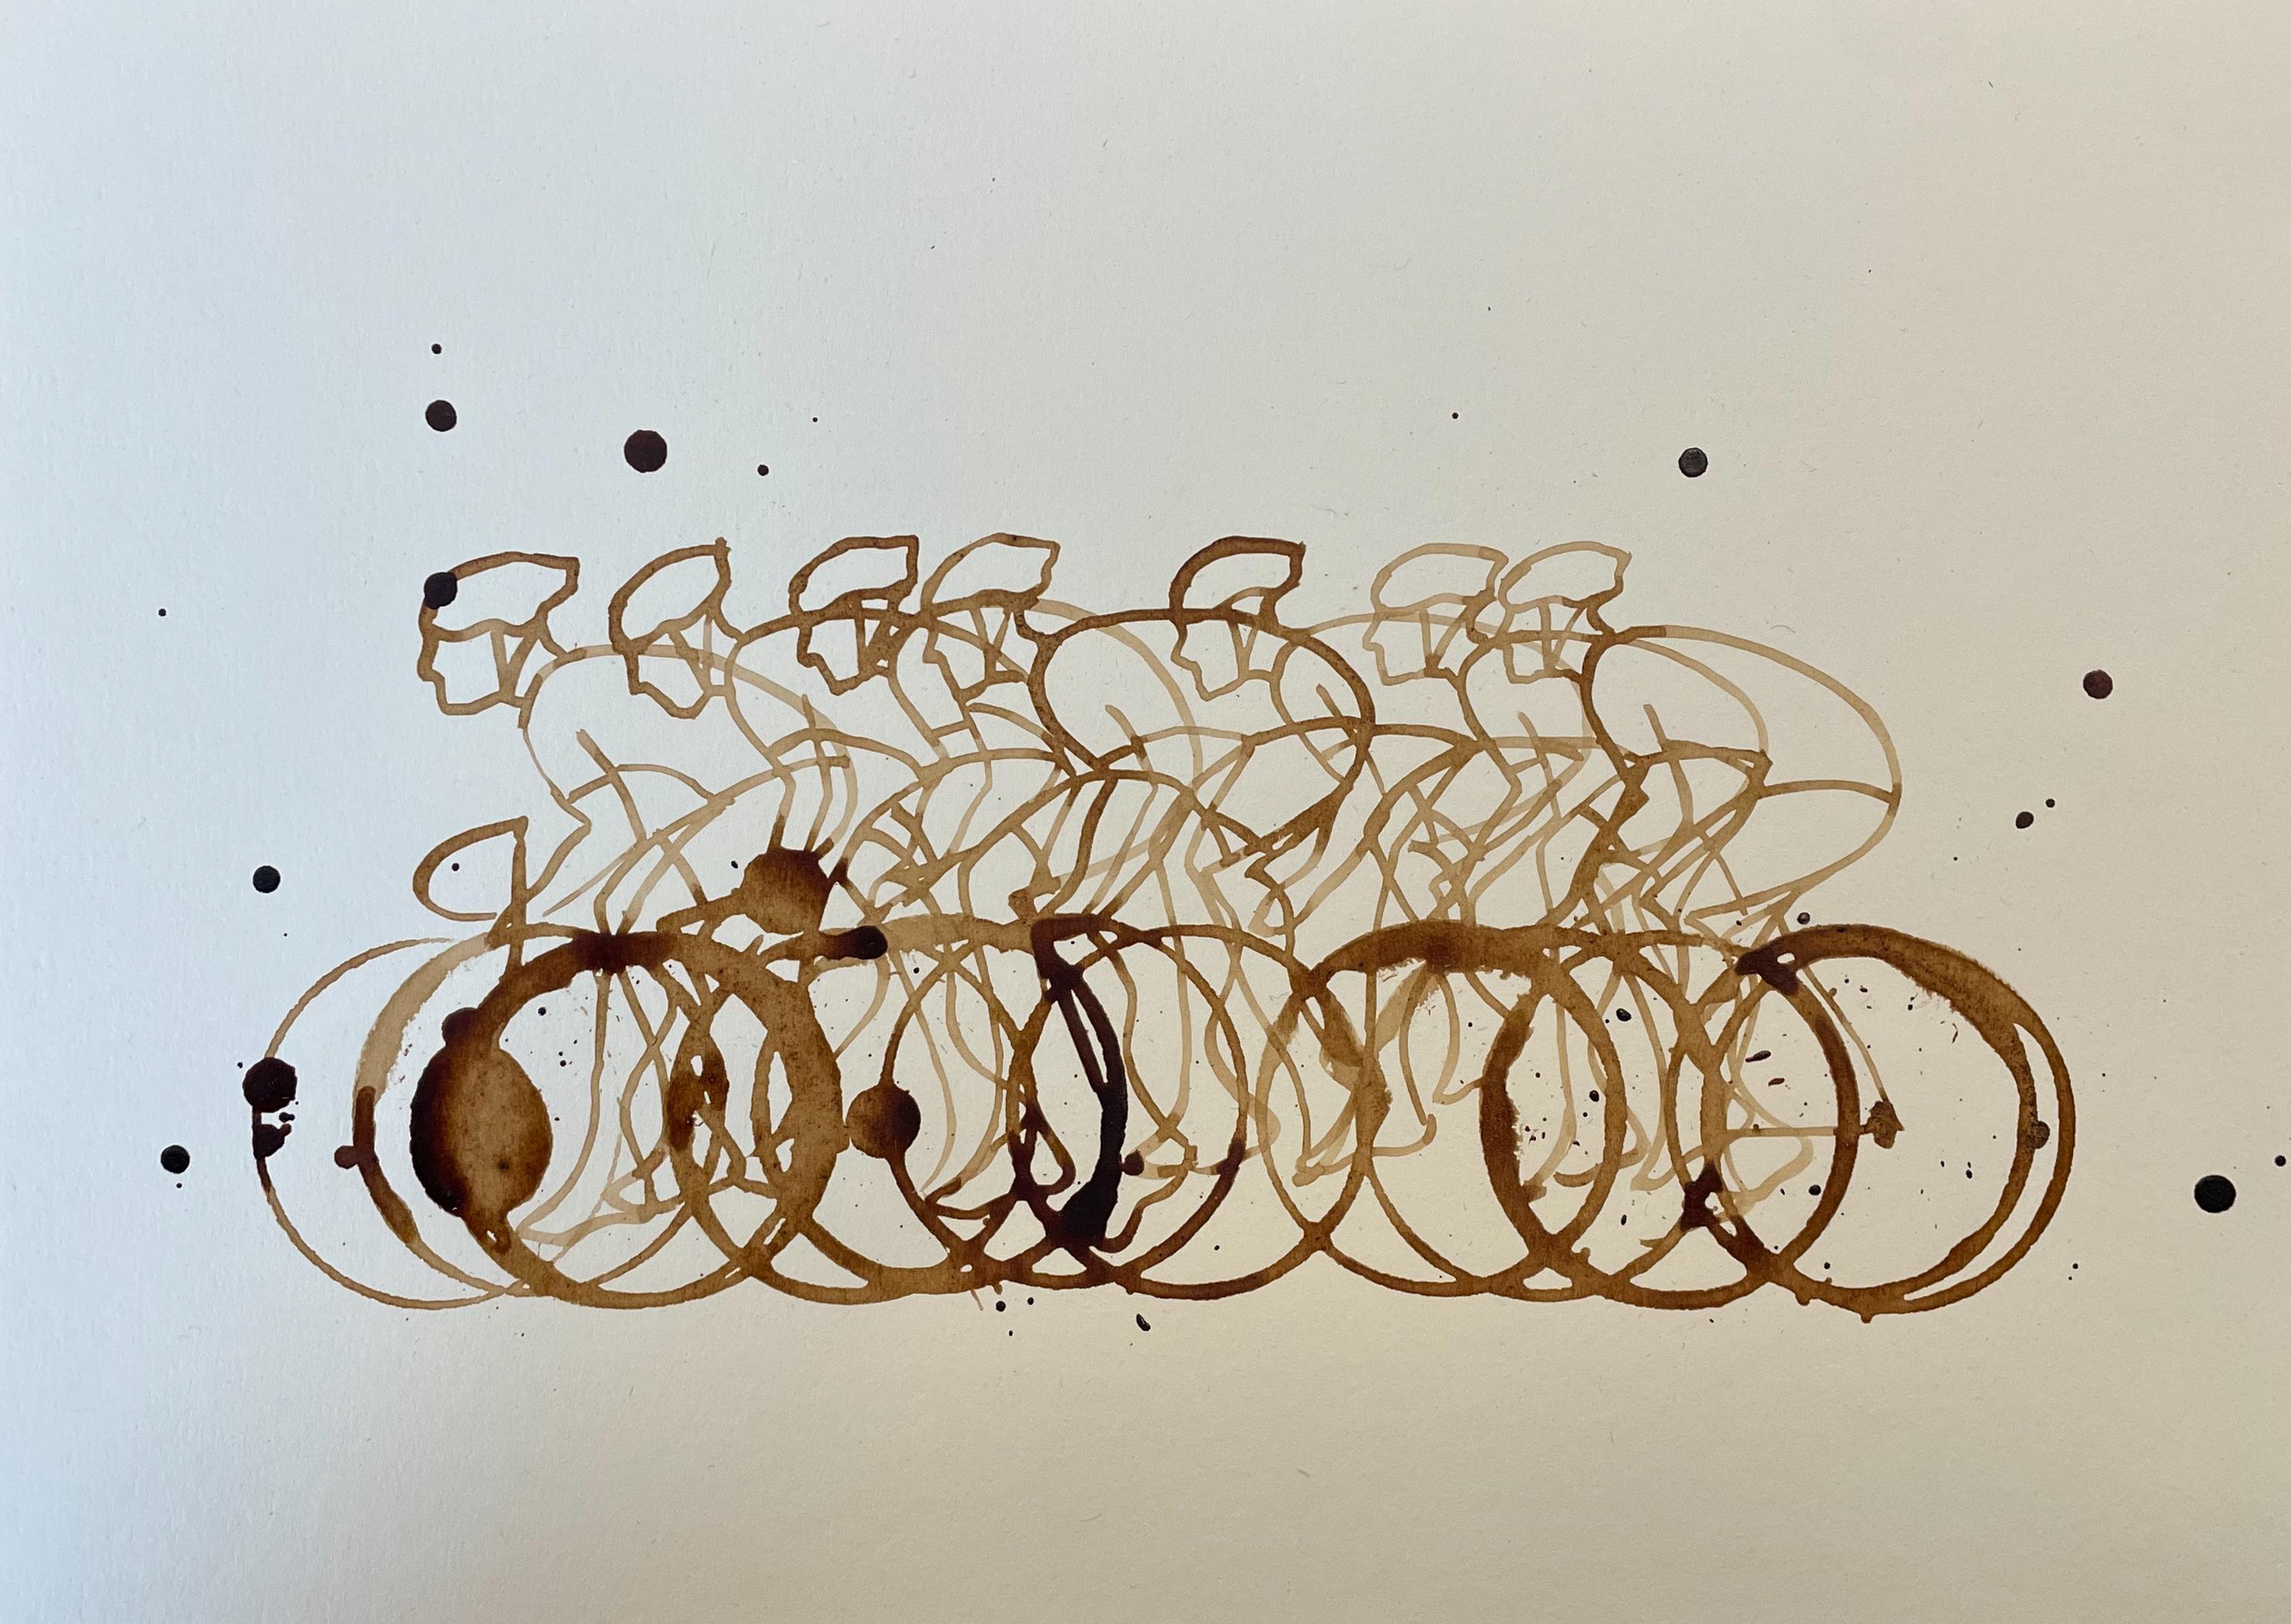 Small Coffee Peloton (CP_Small_01), Coffee On Paper, Cyclists, Sports Art